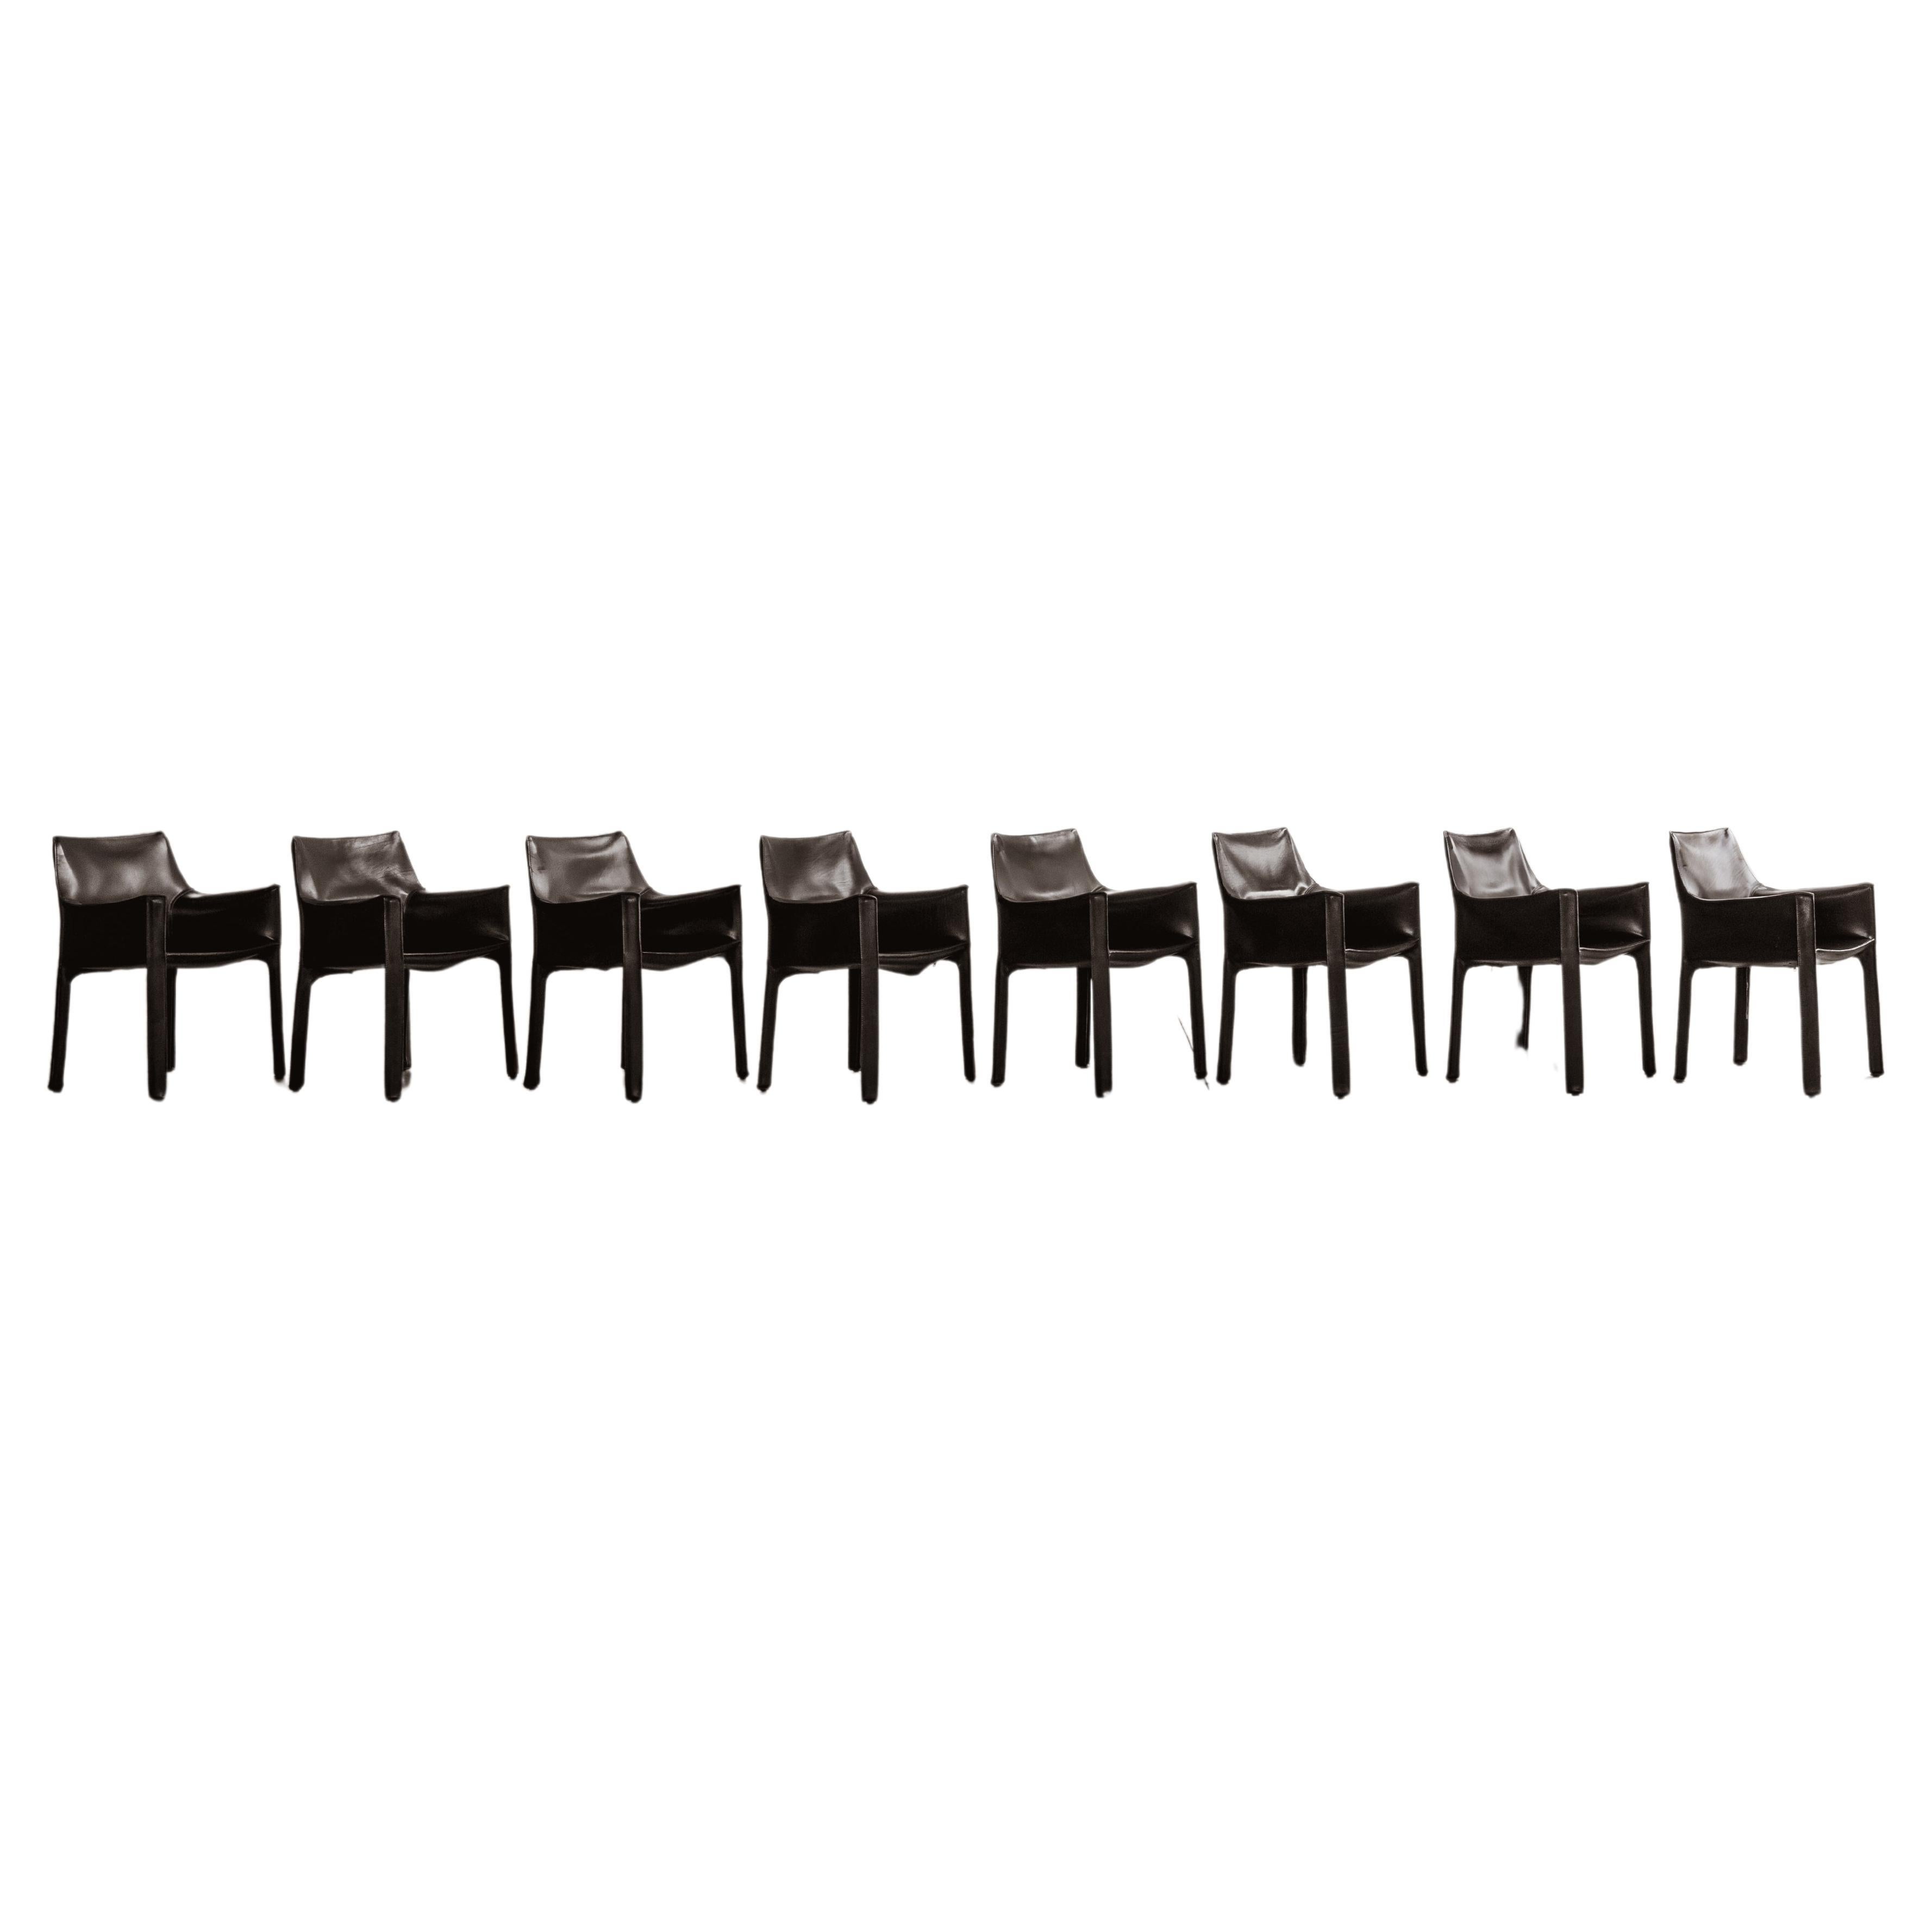 Mario Bellini "CAB 413" Dining Chairs for Cassina, 1977, Set of 8